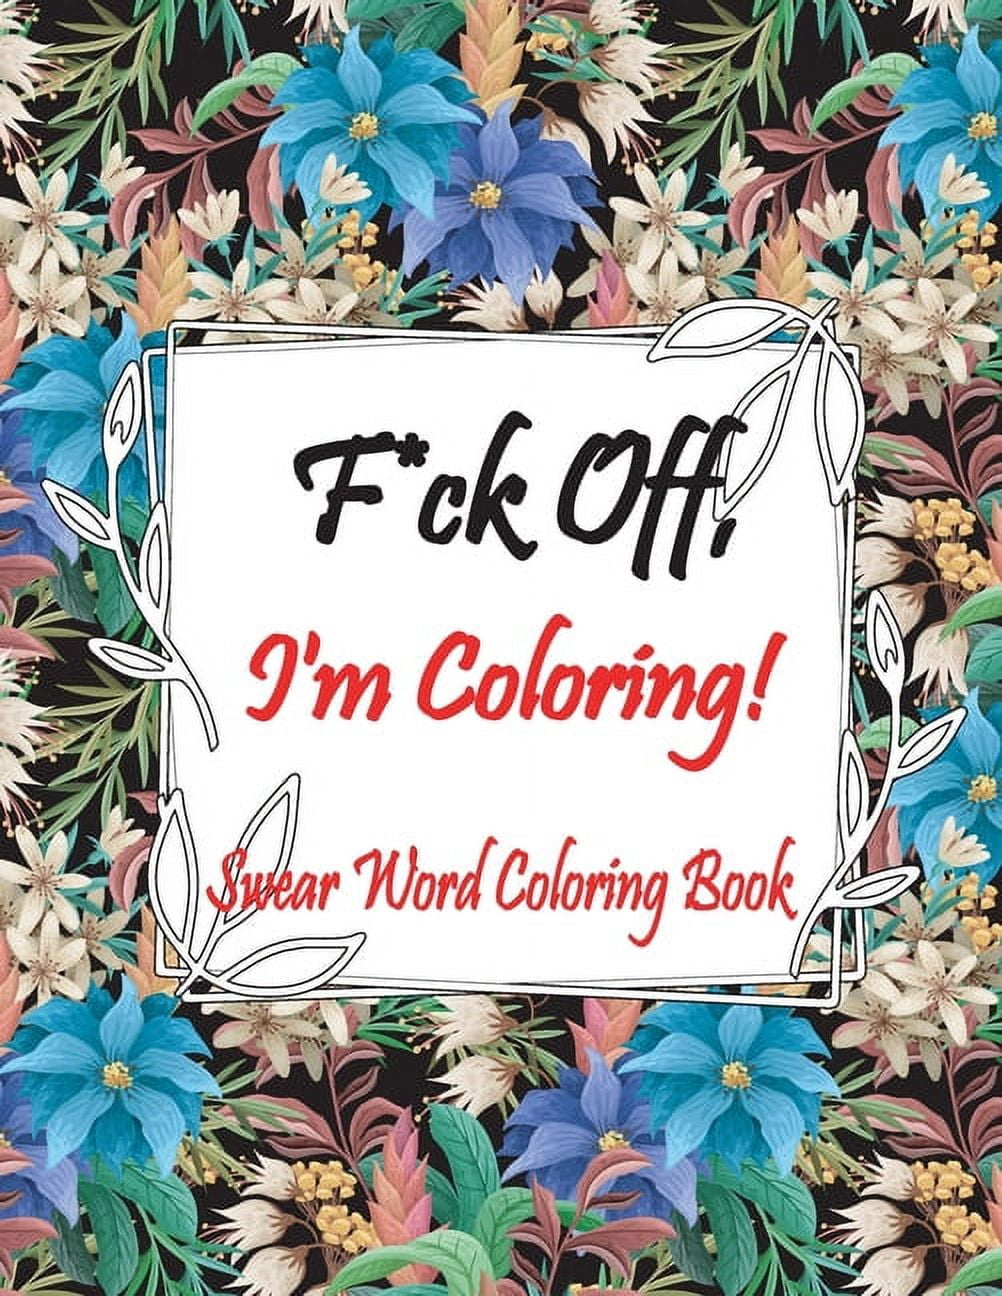 F*ck Off, I'm Coloring! Swear Word Coloring Book: Adult Coloring Books ...